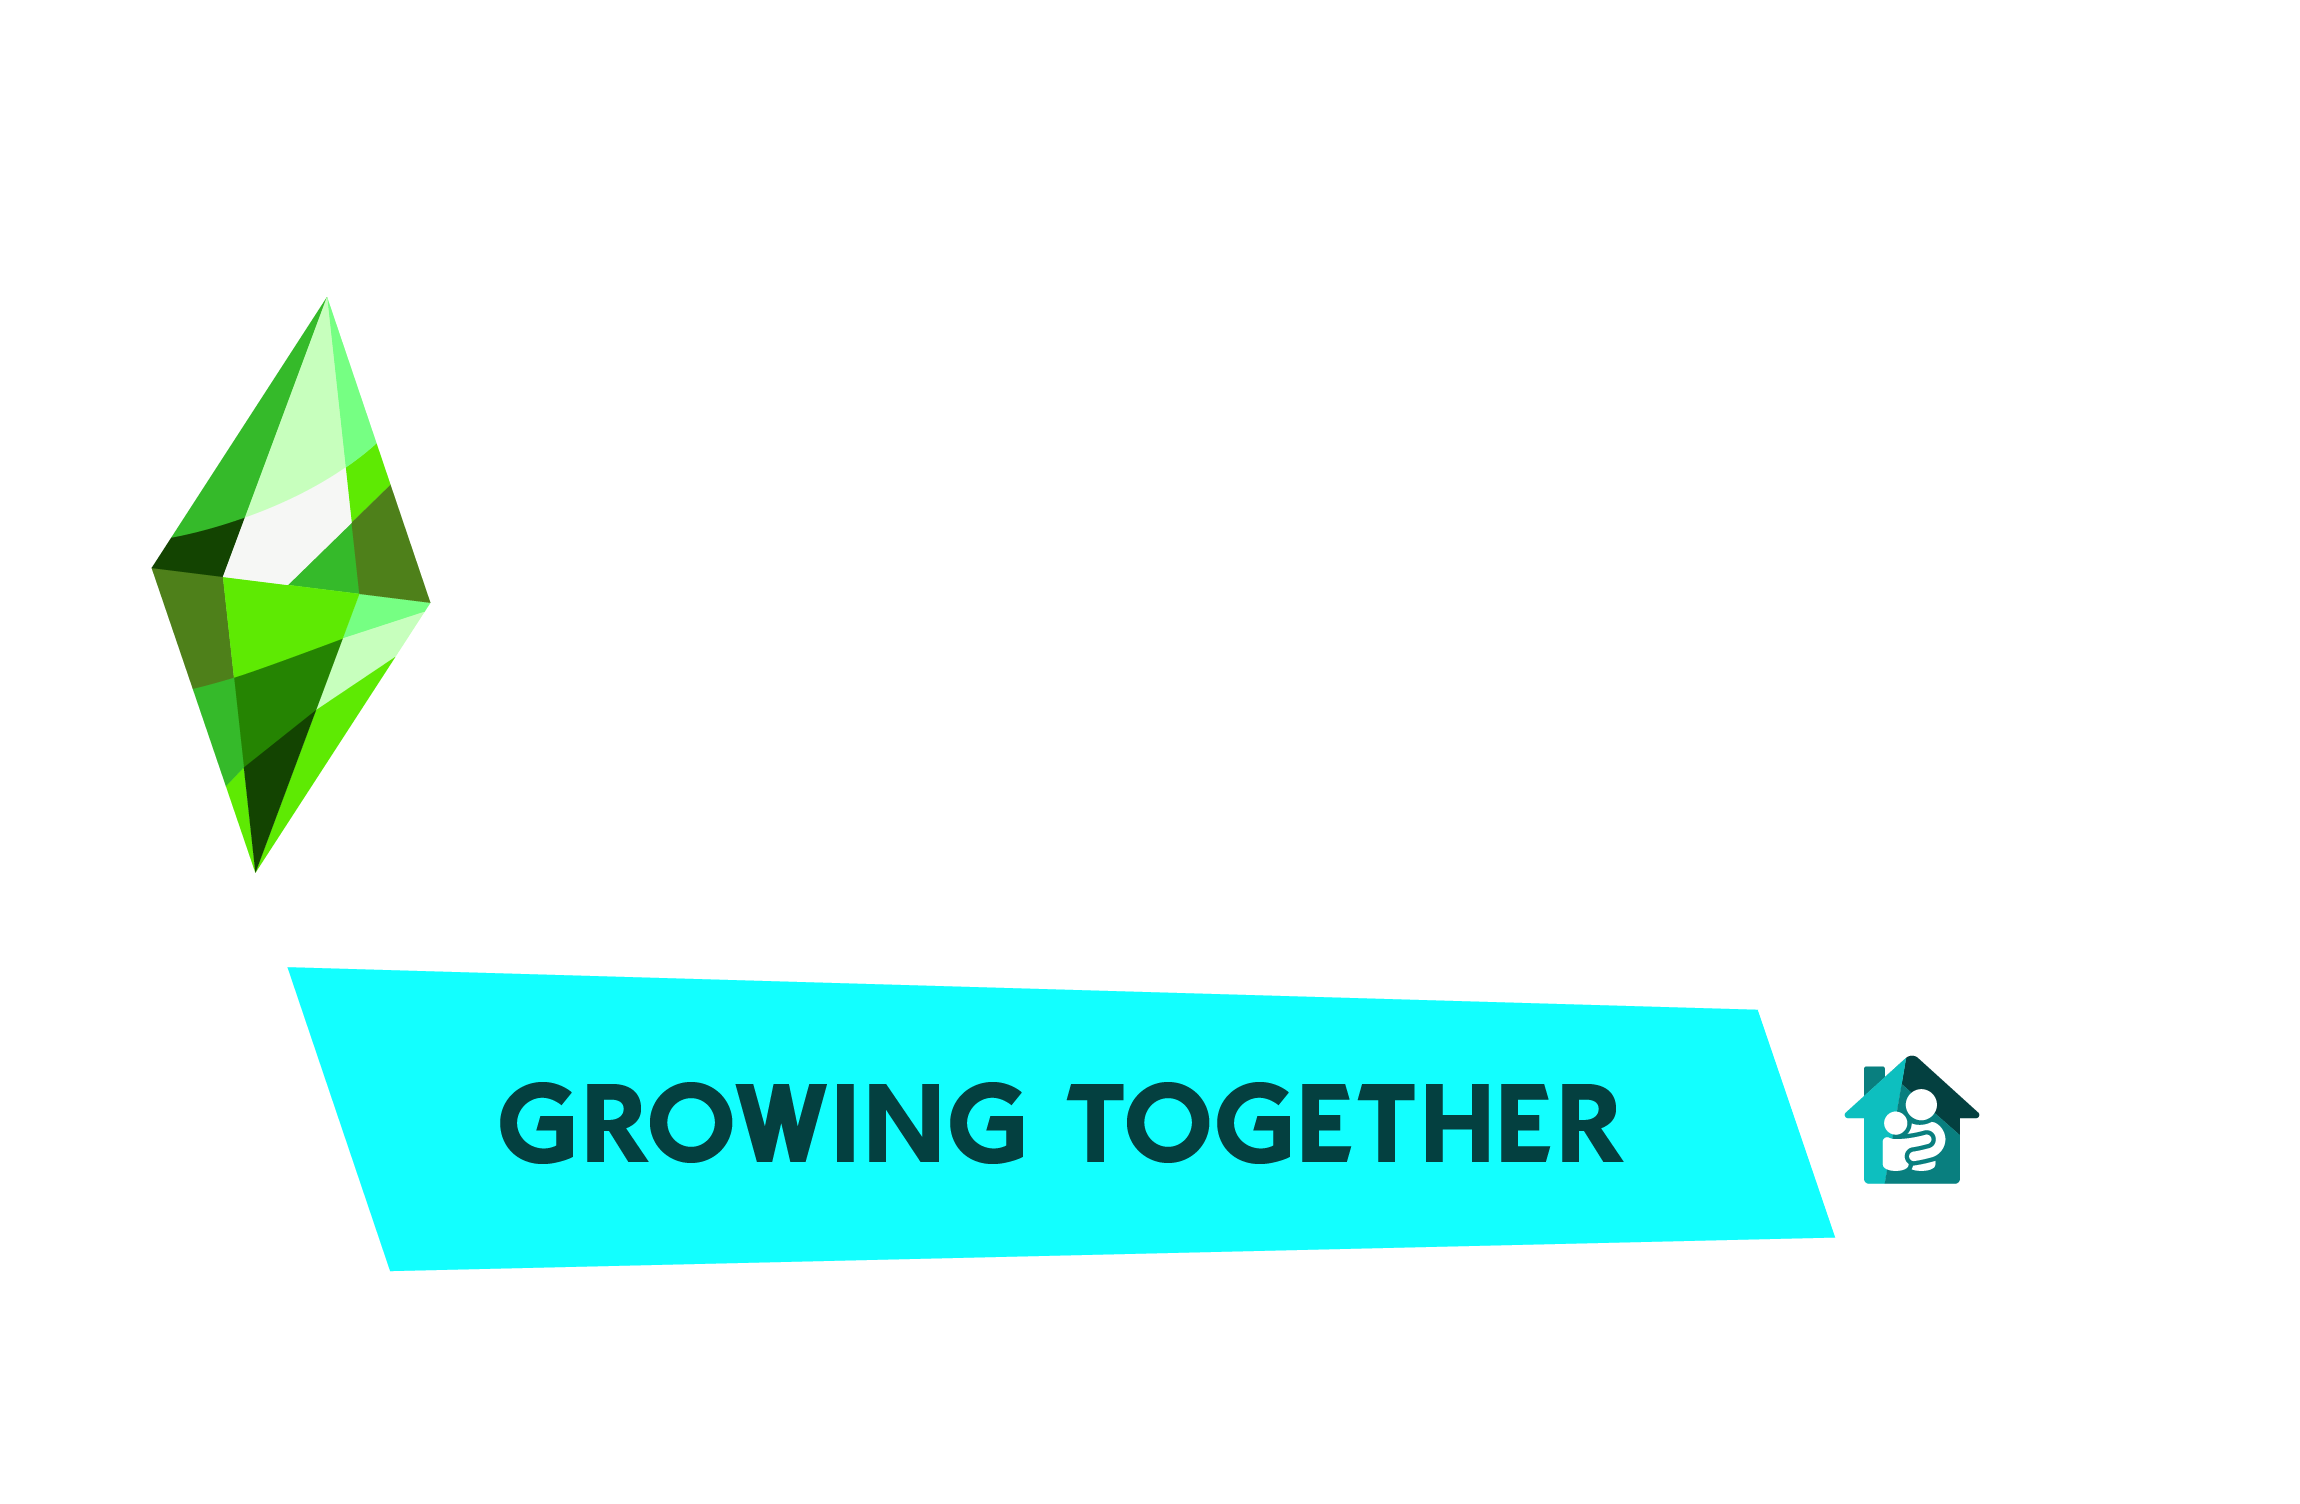 The-Sims-4-Growing-Together-full-game-cracked